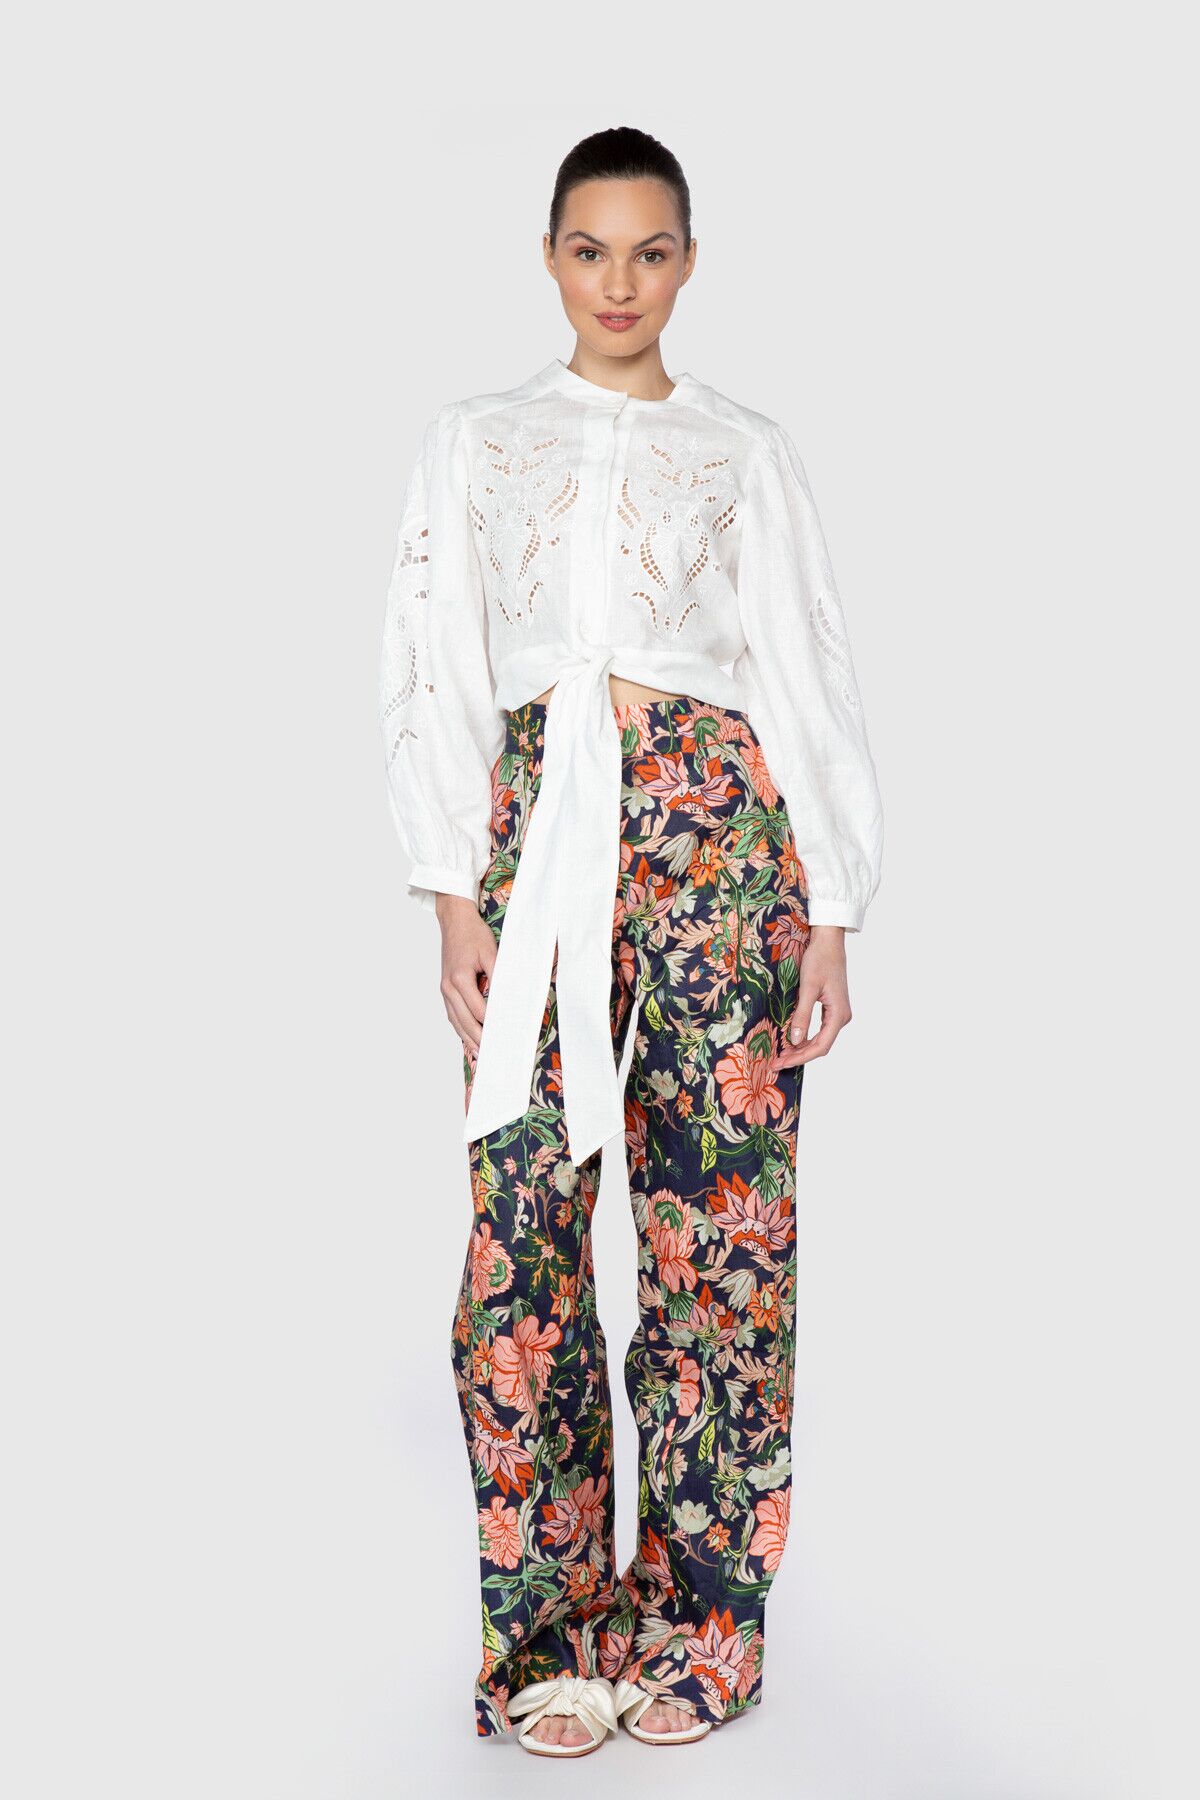 GIZIAGATE - Hole Embroidery Detailed Tie White Blouse